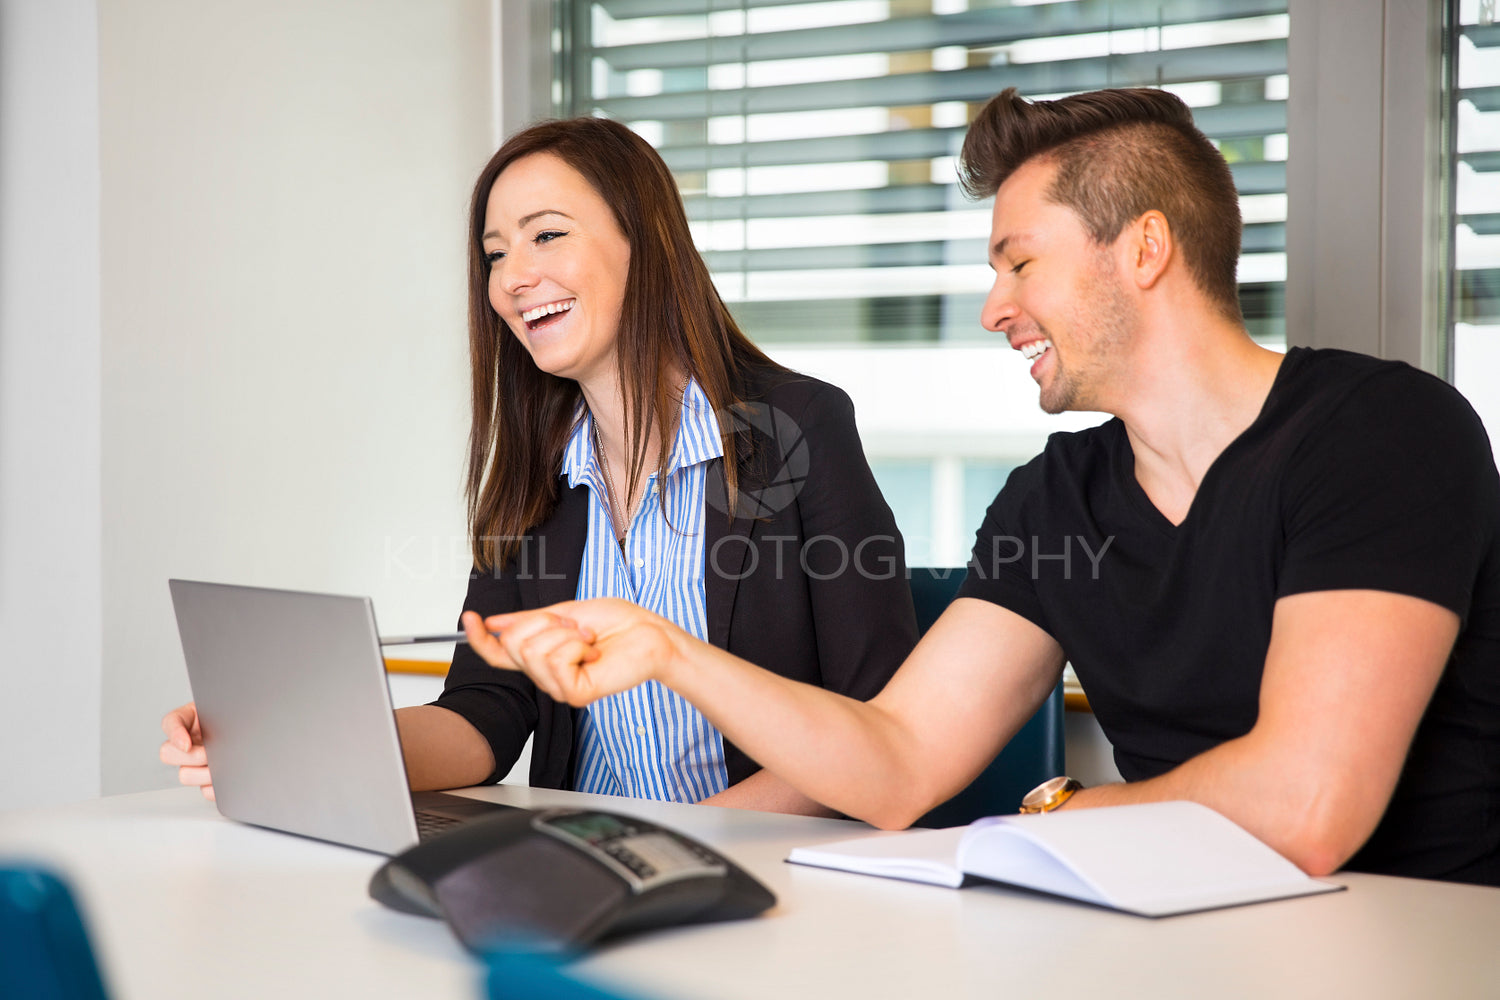 Smiling Business People With Laptop Communicating At Desk